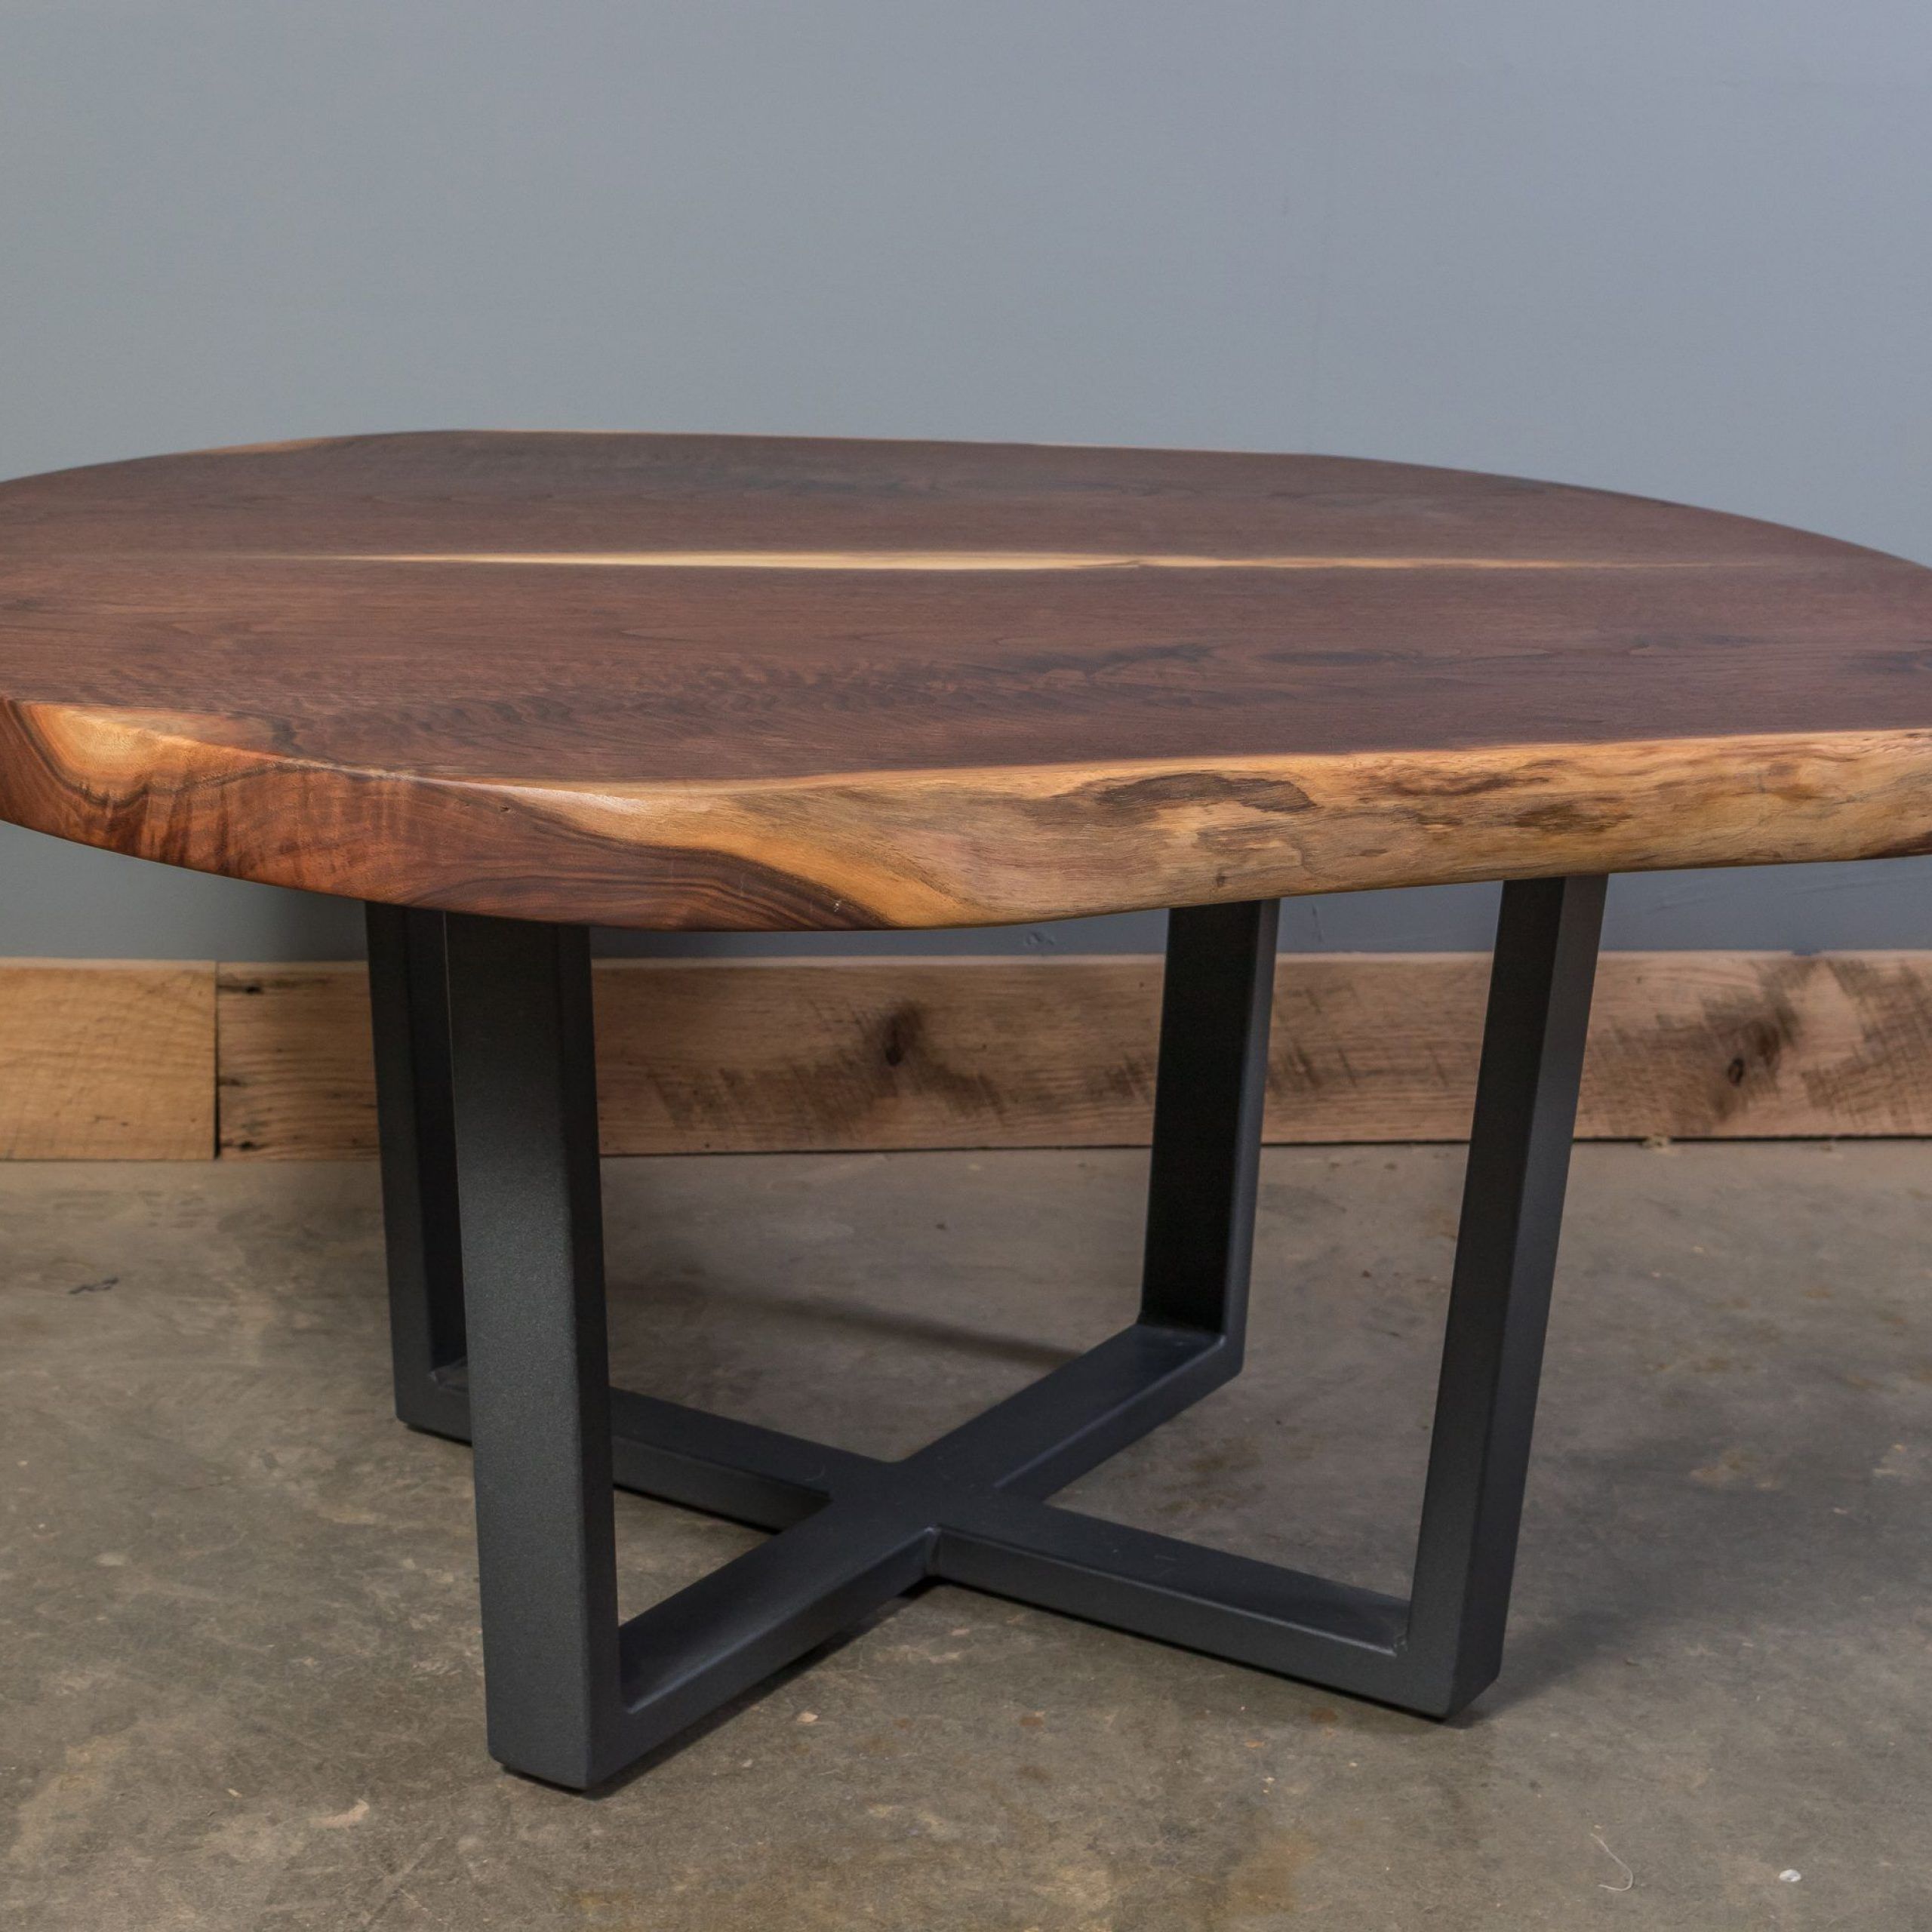 2019 Dark Walnut Drink Tables Throughout Buy Handmade Live Edge Black Walnut Coffee Table, Made To Order From Kc (View 6 of 10)